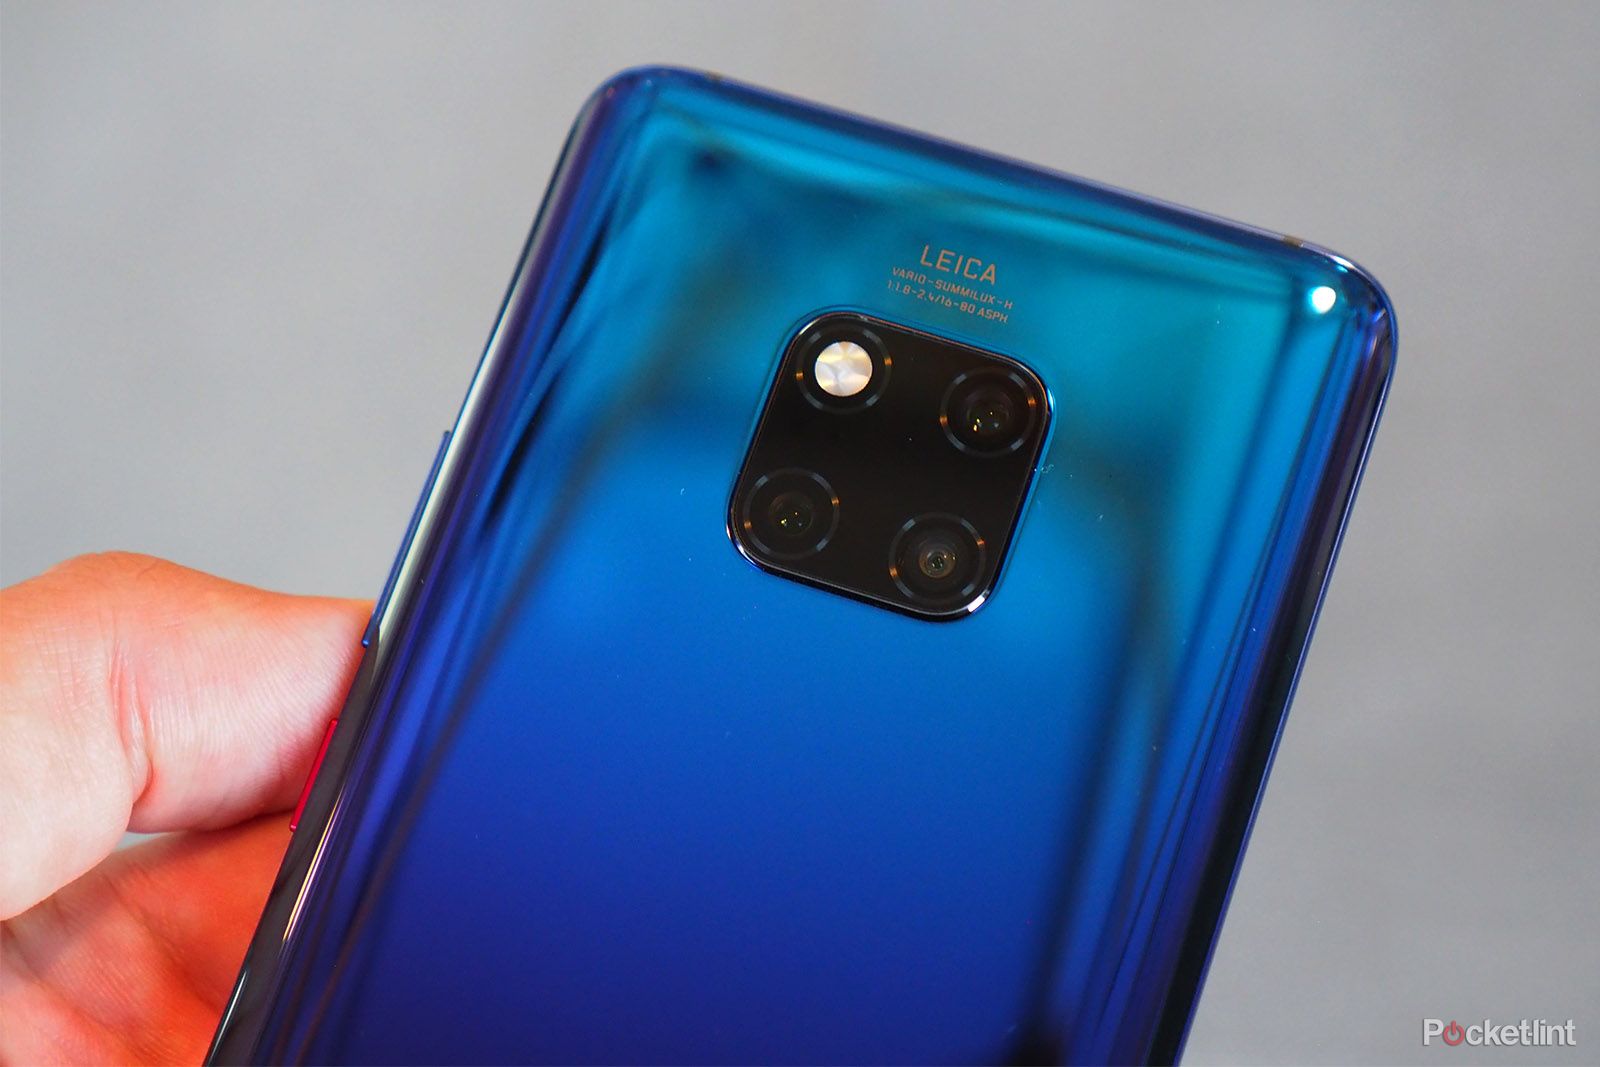 dual triple quad camera smartphones the history running through to the samsung galaxy s10 image 7